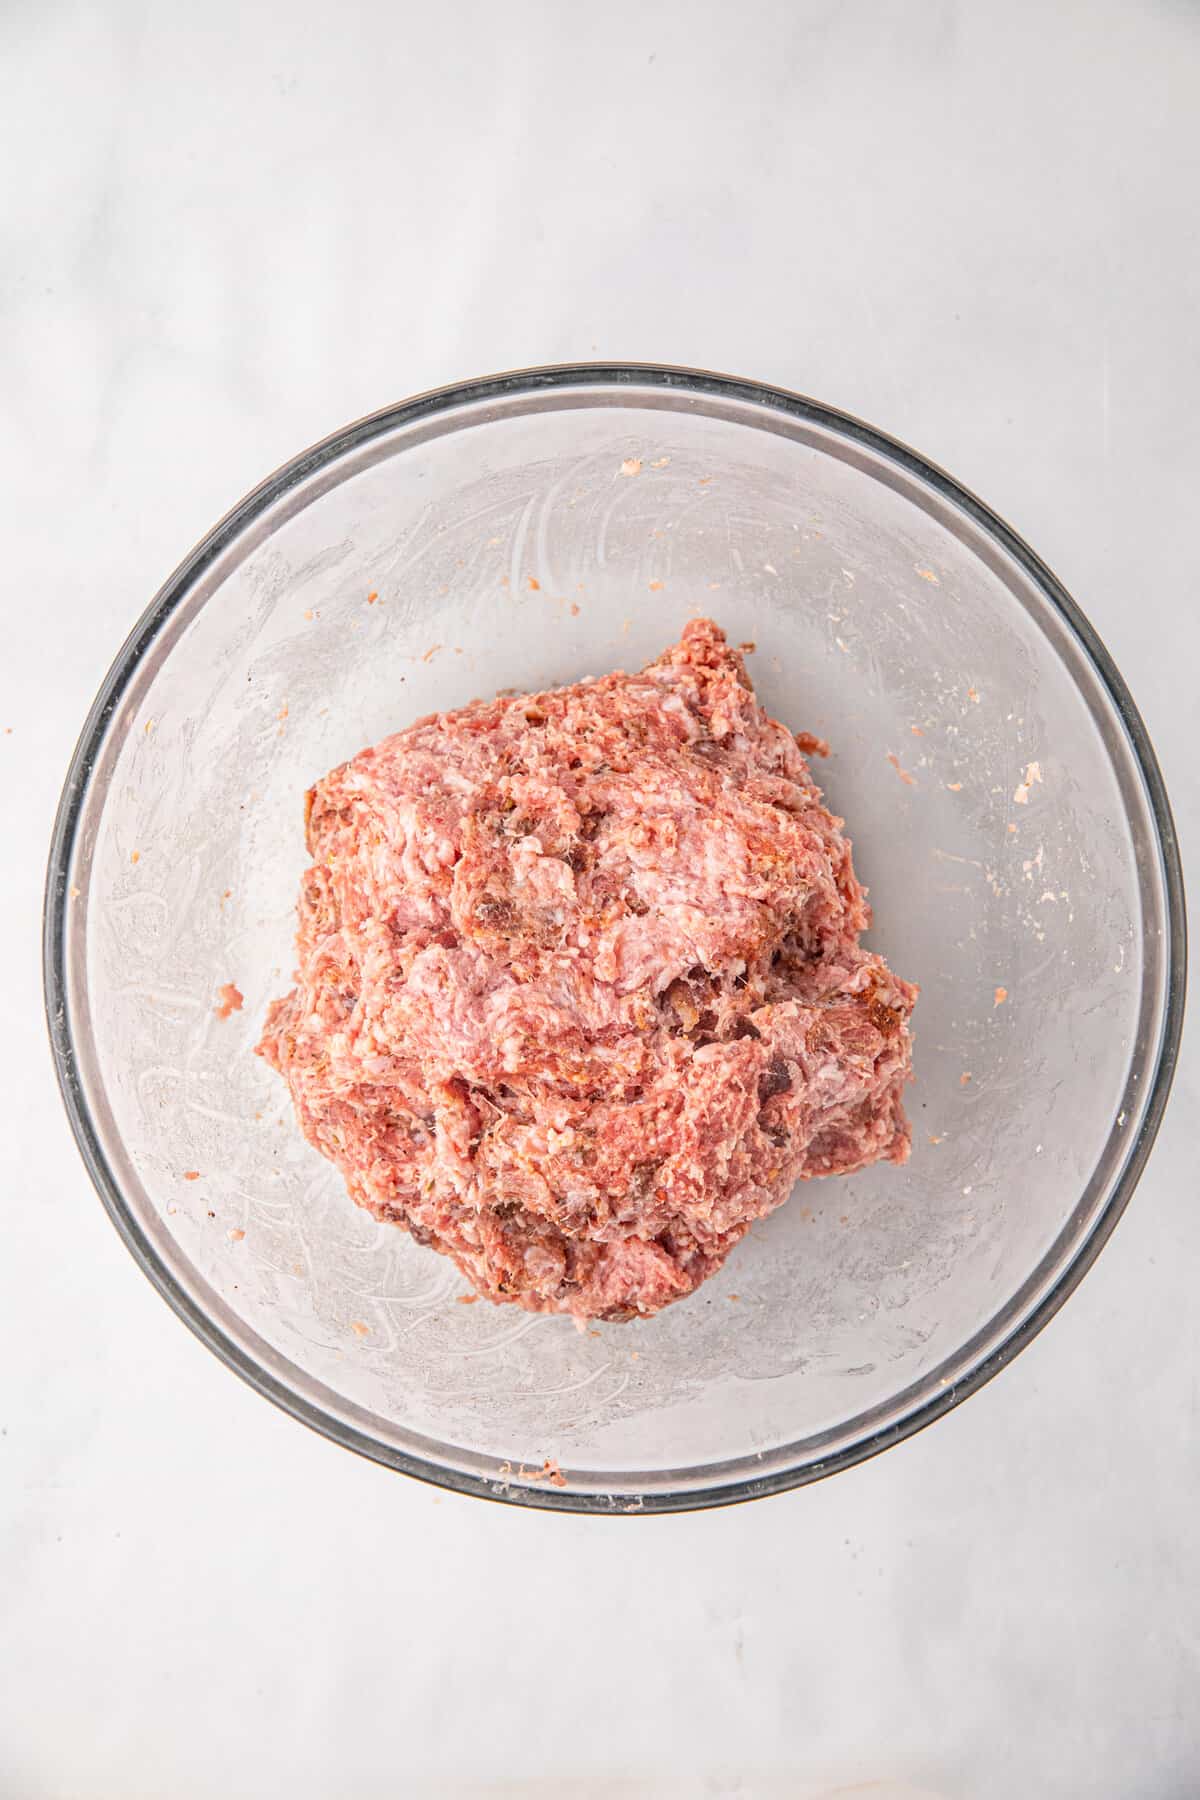 Ground pork and pork sausage in mixing bowl for Bacon Explosion recipe